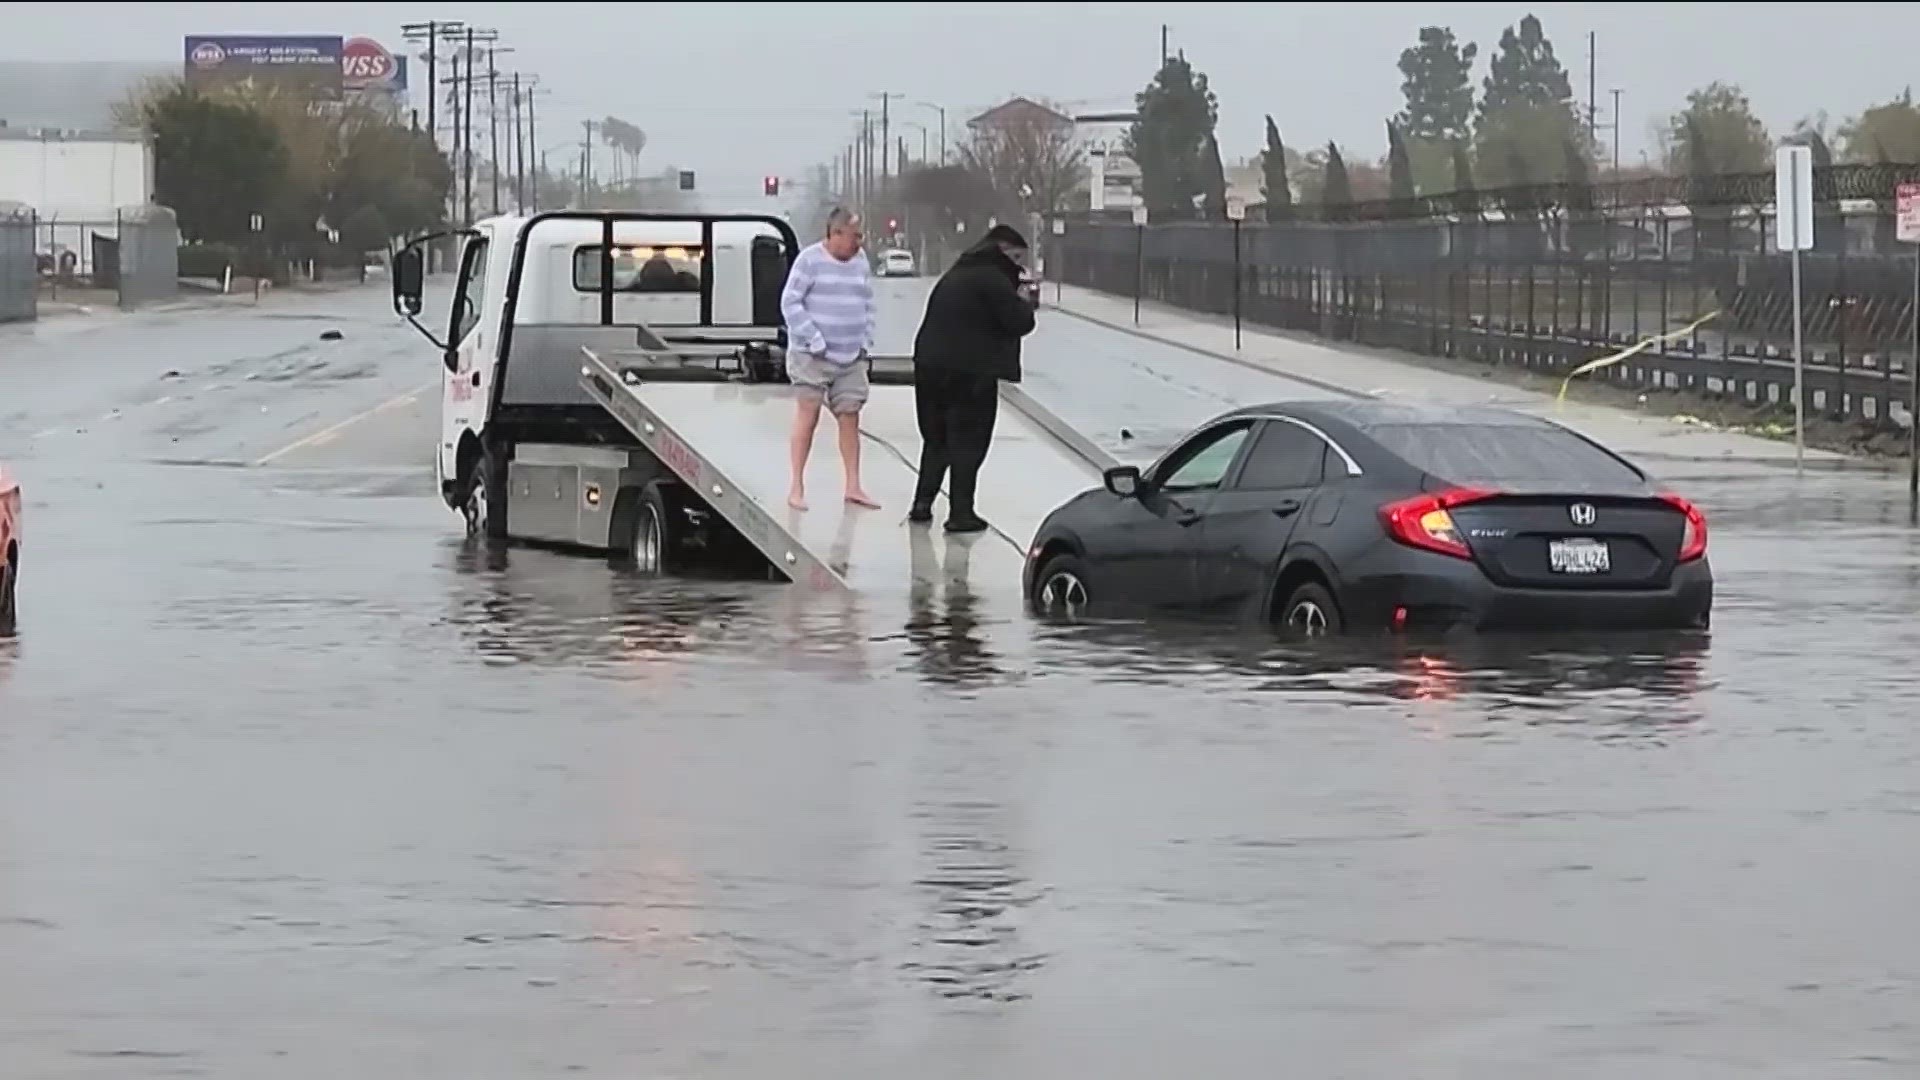 Los Angeles has seen more than double the rain that Seattle has seen so far this year.